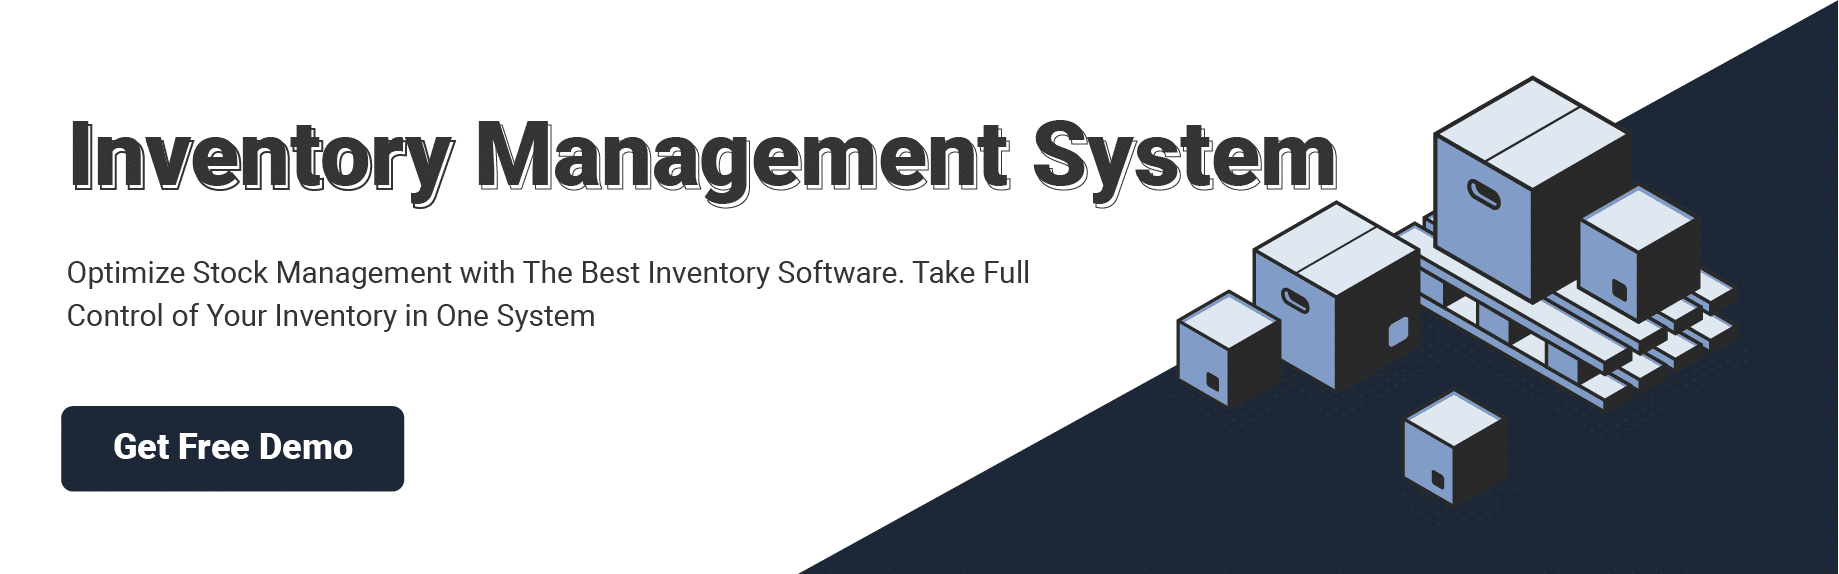 choosing inventory management system